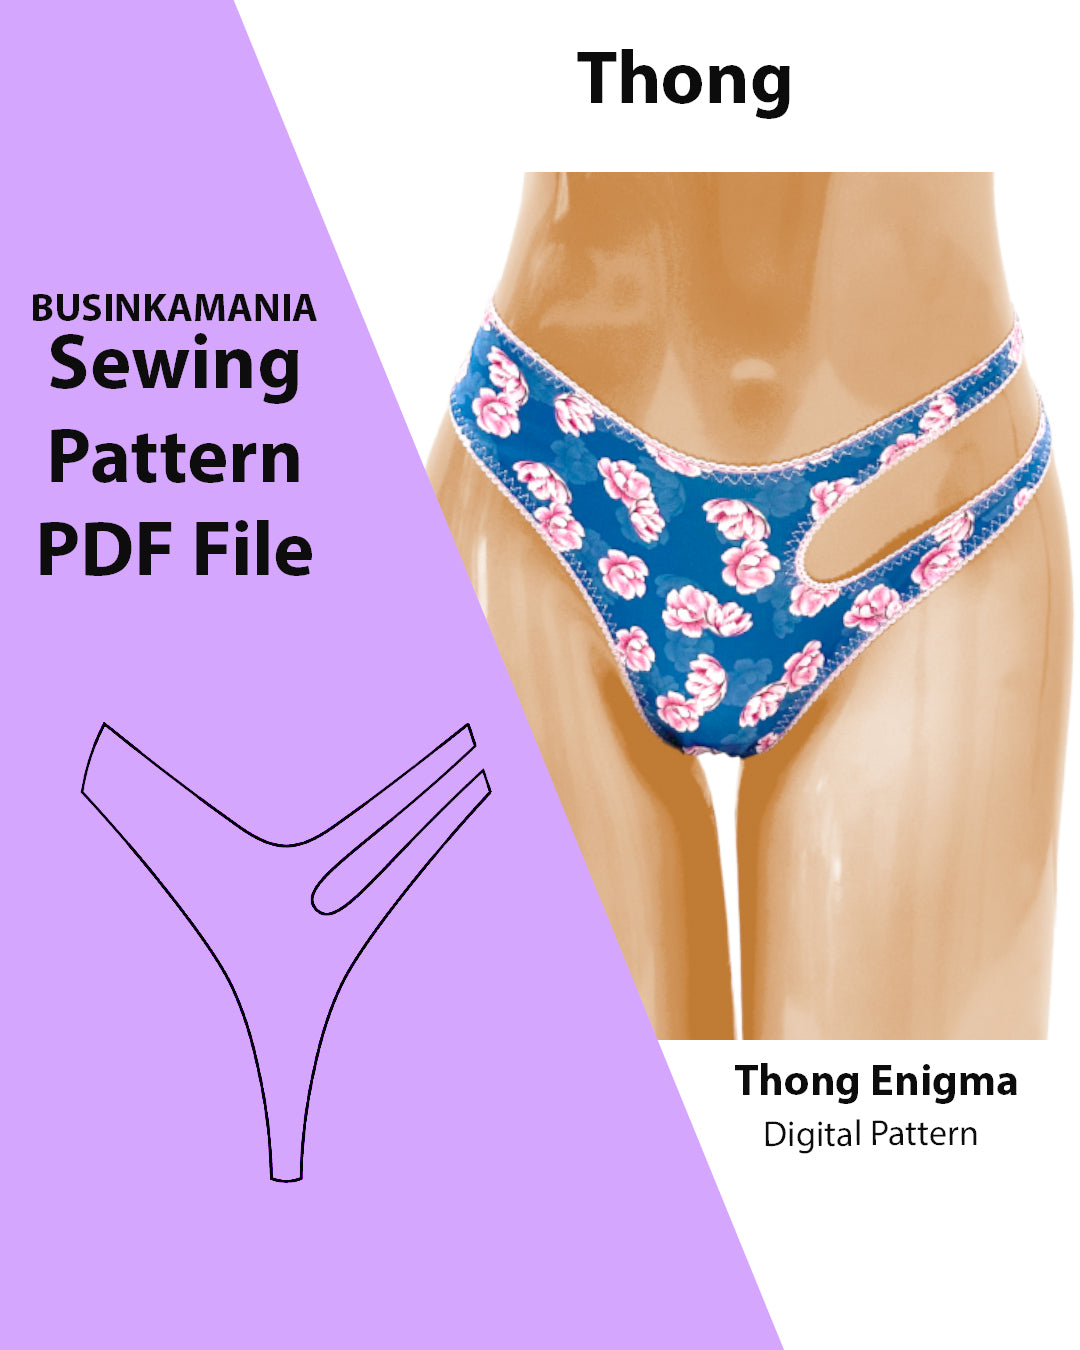 Thong Enigma Sewing Pattern